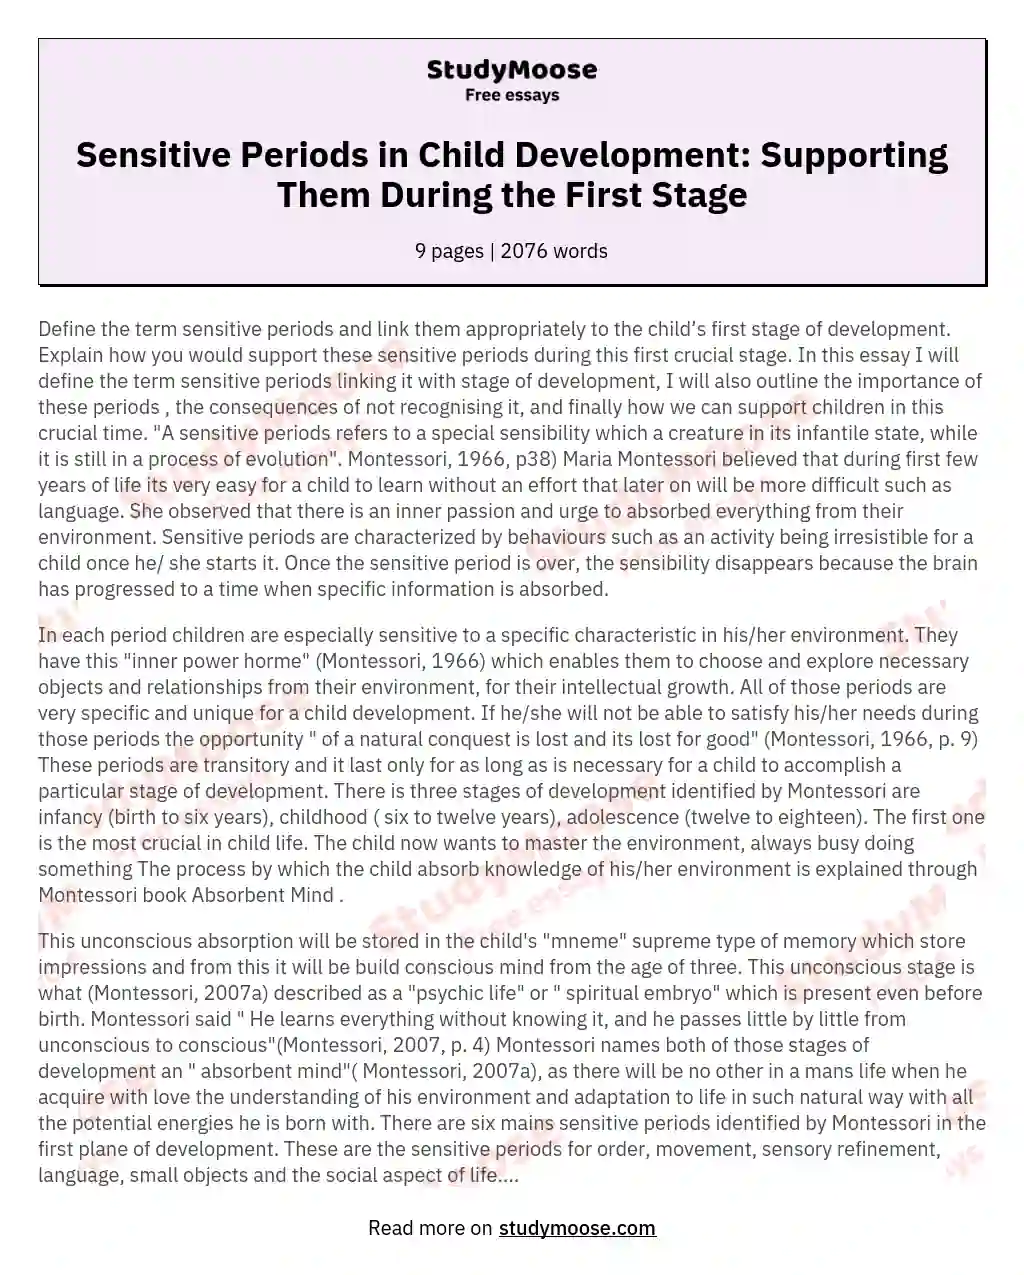 Define the Term Sensitive Periods and Link Them Appropriately to the Child’s First Stage of Development. Explain How You Would Support These Sensitive Periods During This First Crucial Stage.